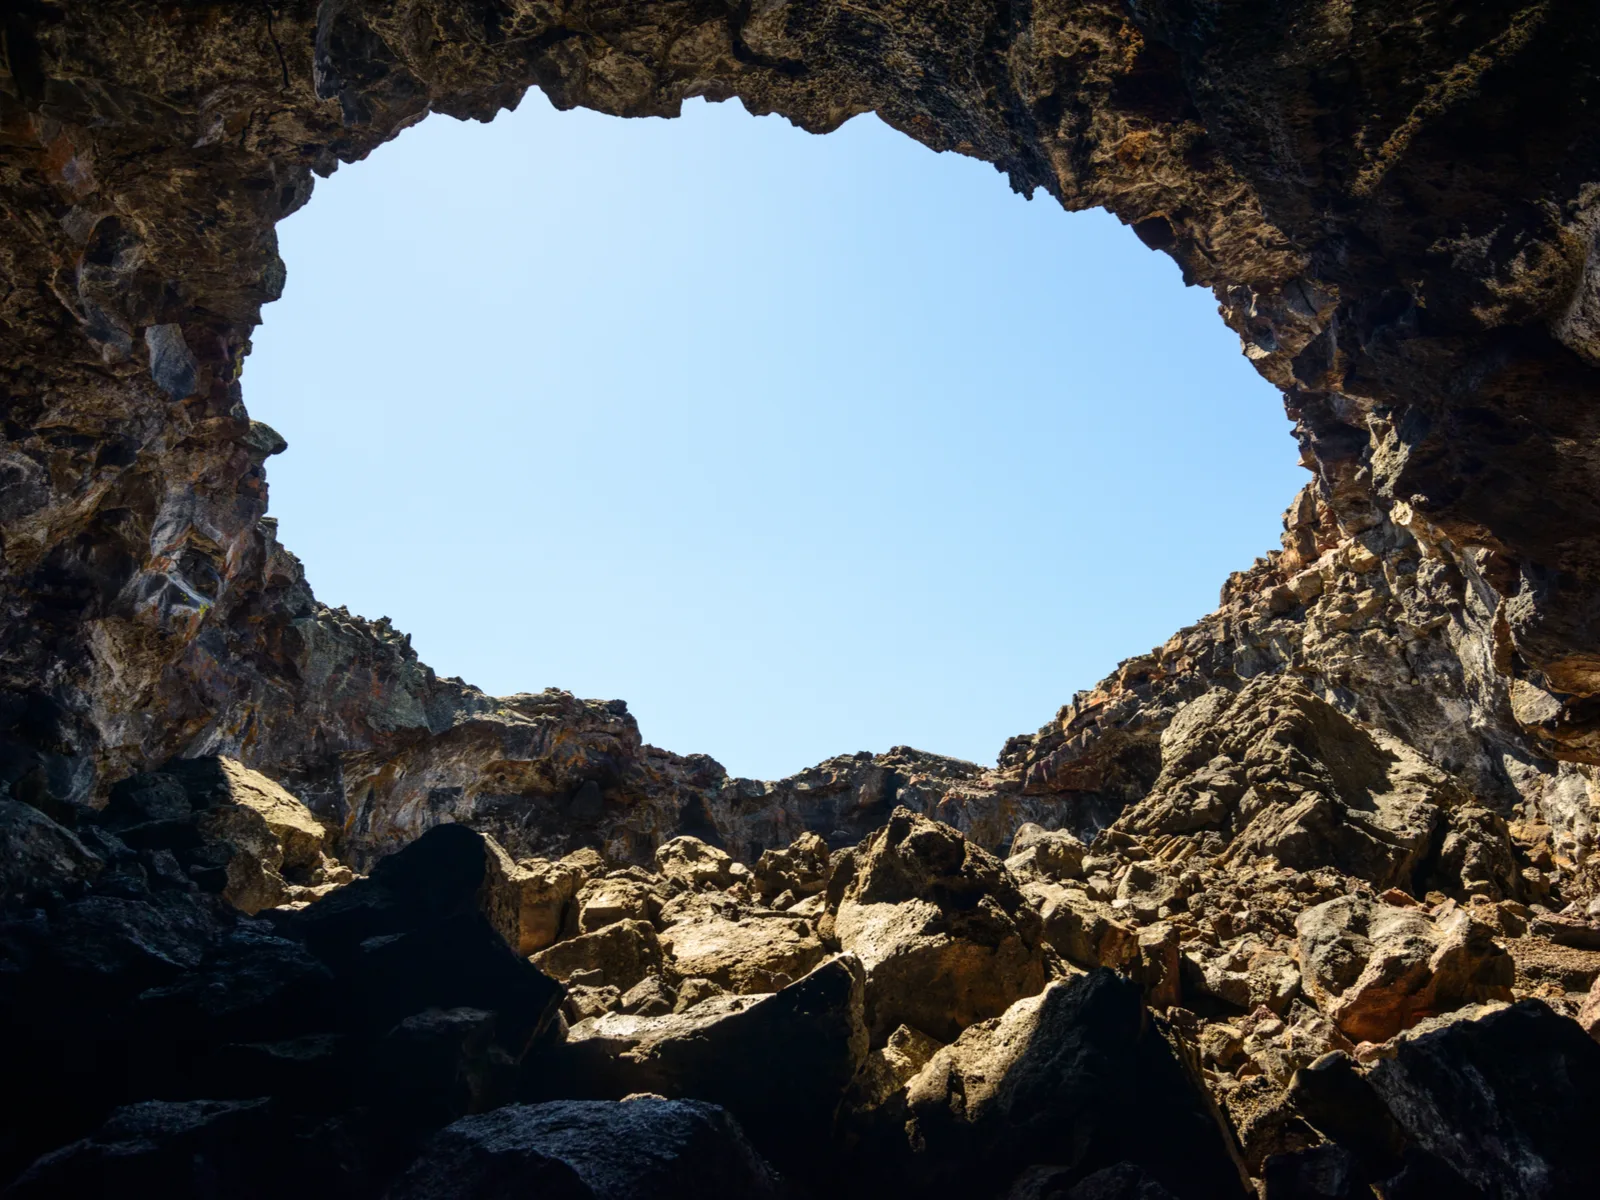 The famous hole on the rocks at Craters of the Moon National Monument and Preserve, one of the best things to see in Idaho